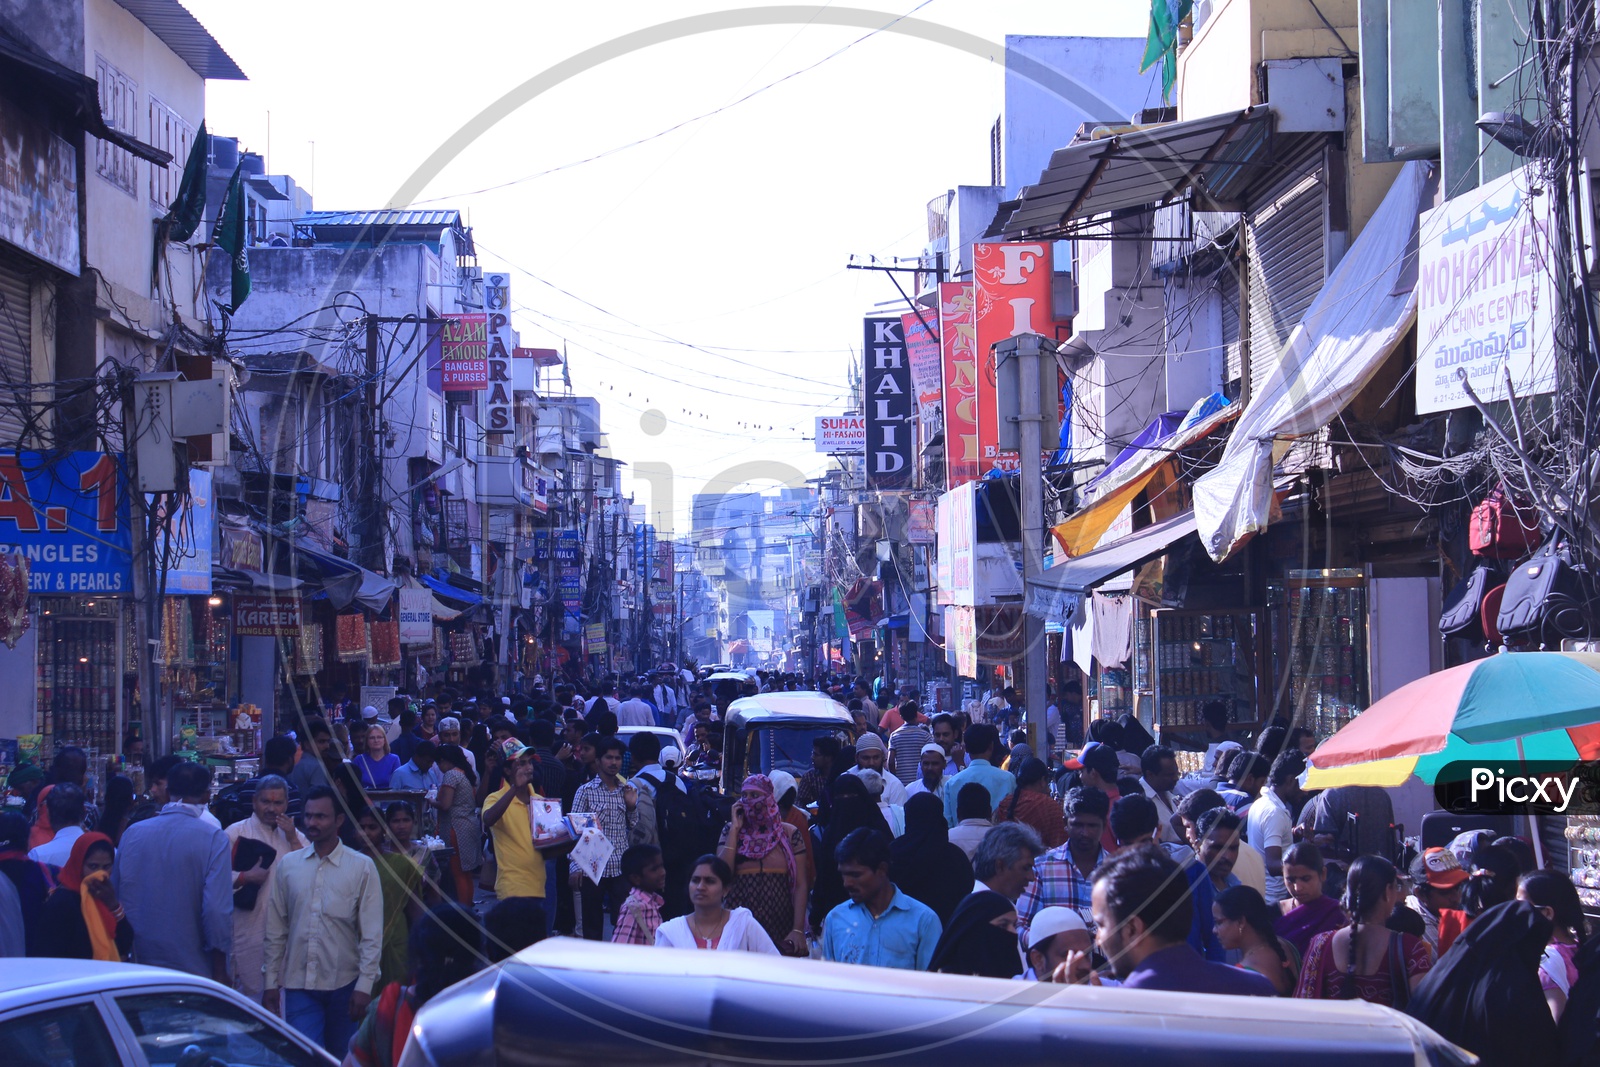 Busy Ghansi Bazaar Street With Visitors Shopping Bangles In Stores Near Charminar